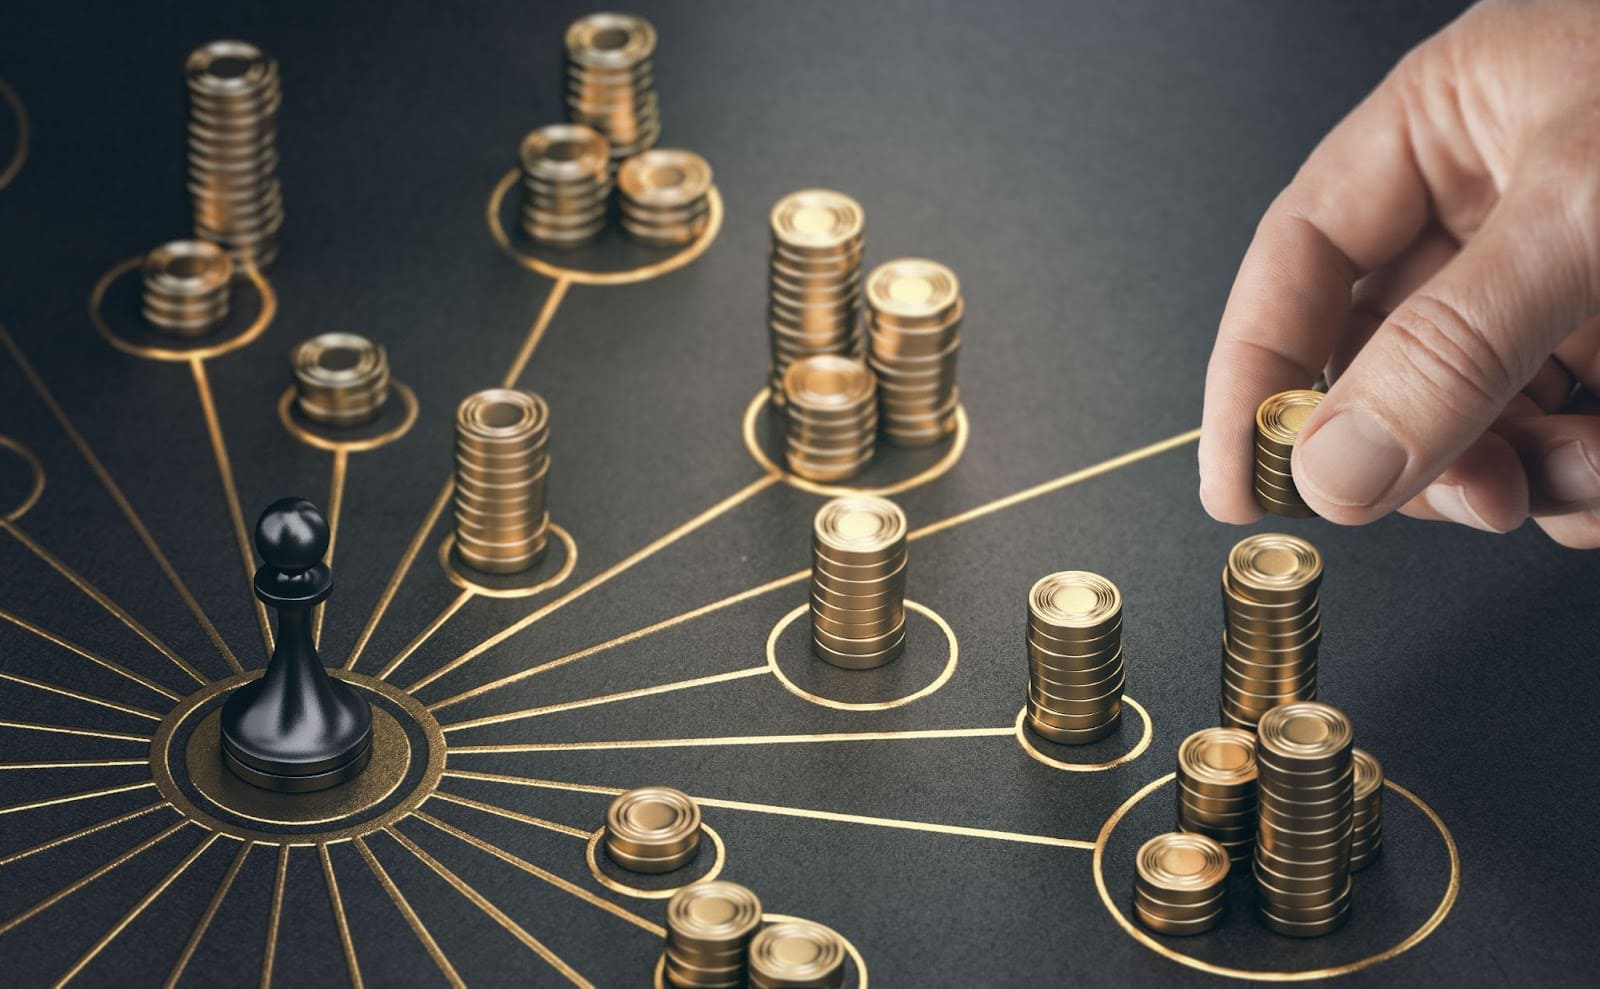 Man putting golden coins on a board representing multiple streams of income. Concept of multiplying sources of revenue.